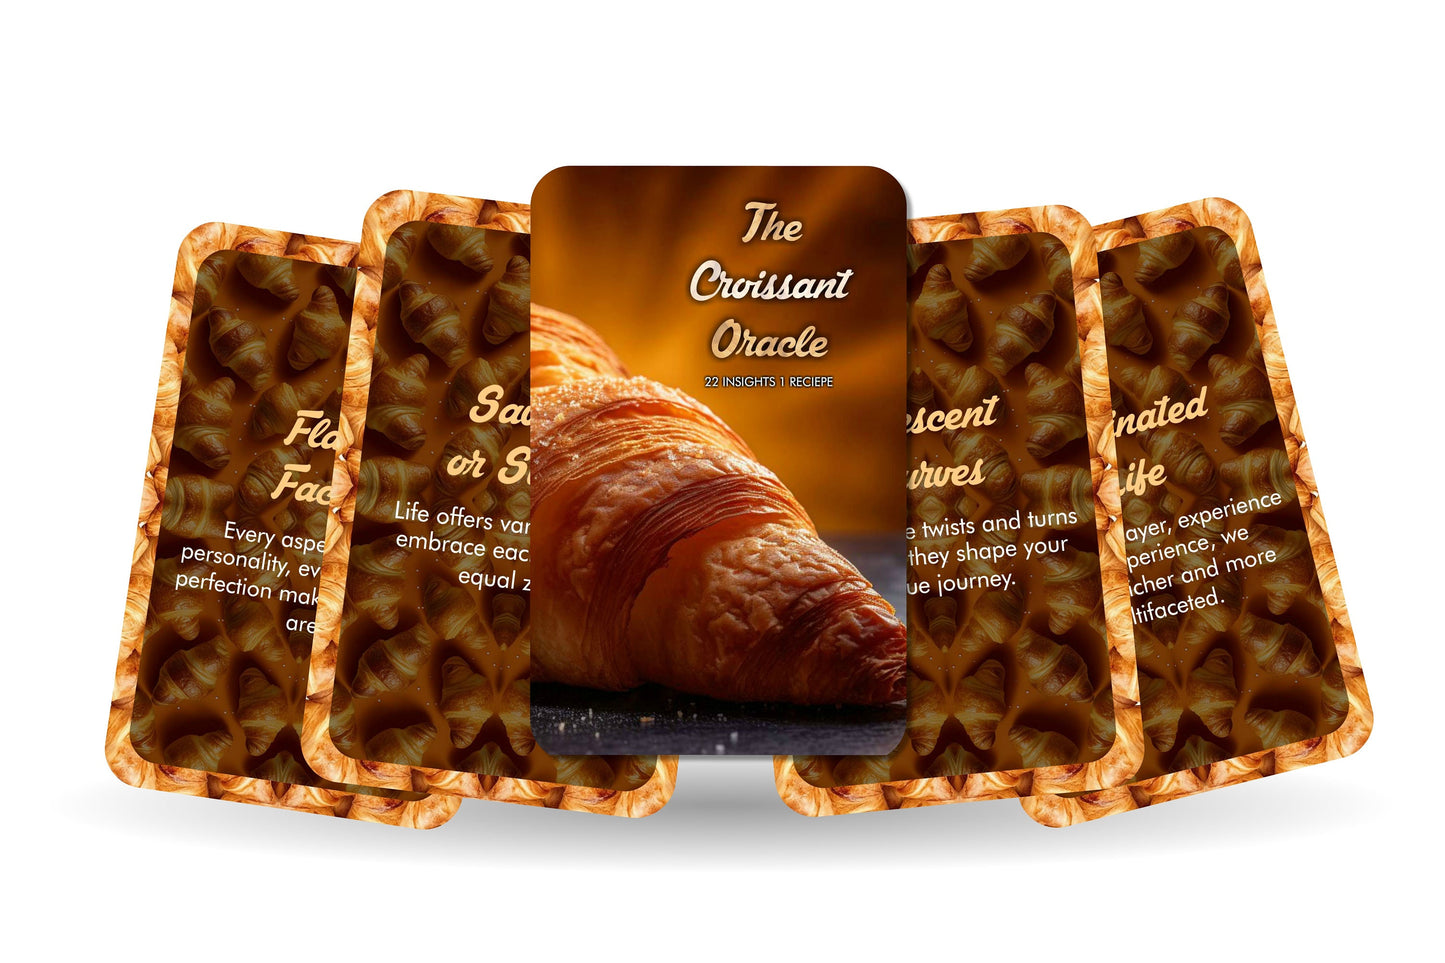 The Croissant Oracle - Twenty Two insights and One recipe